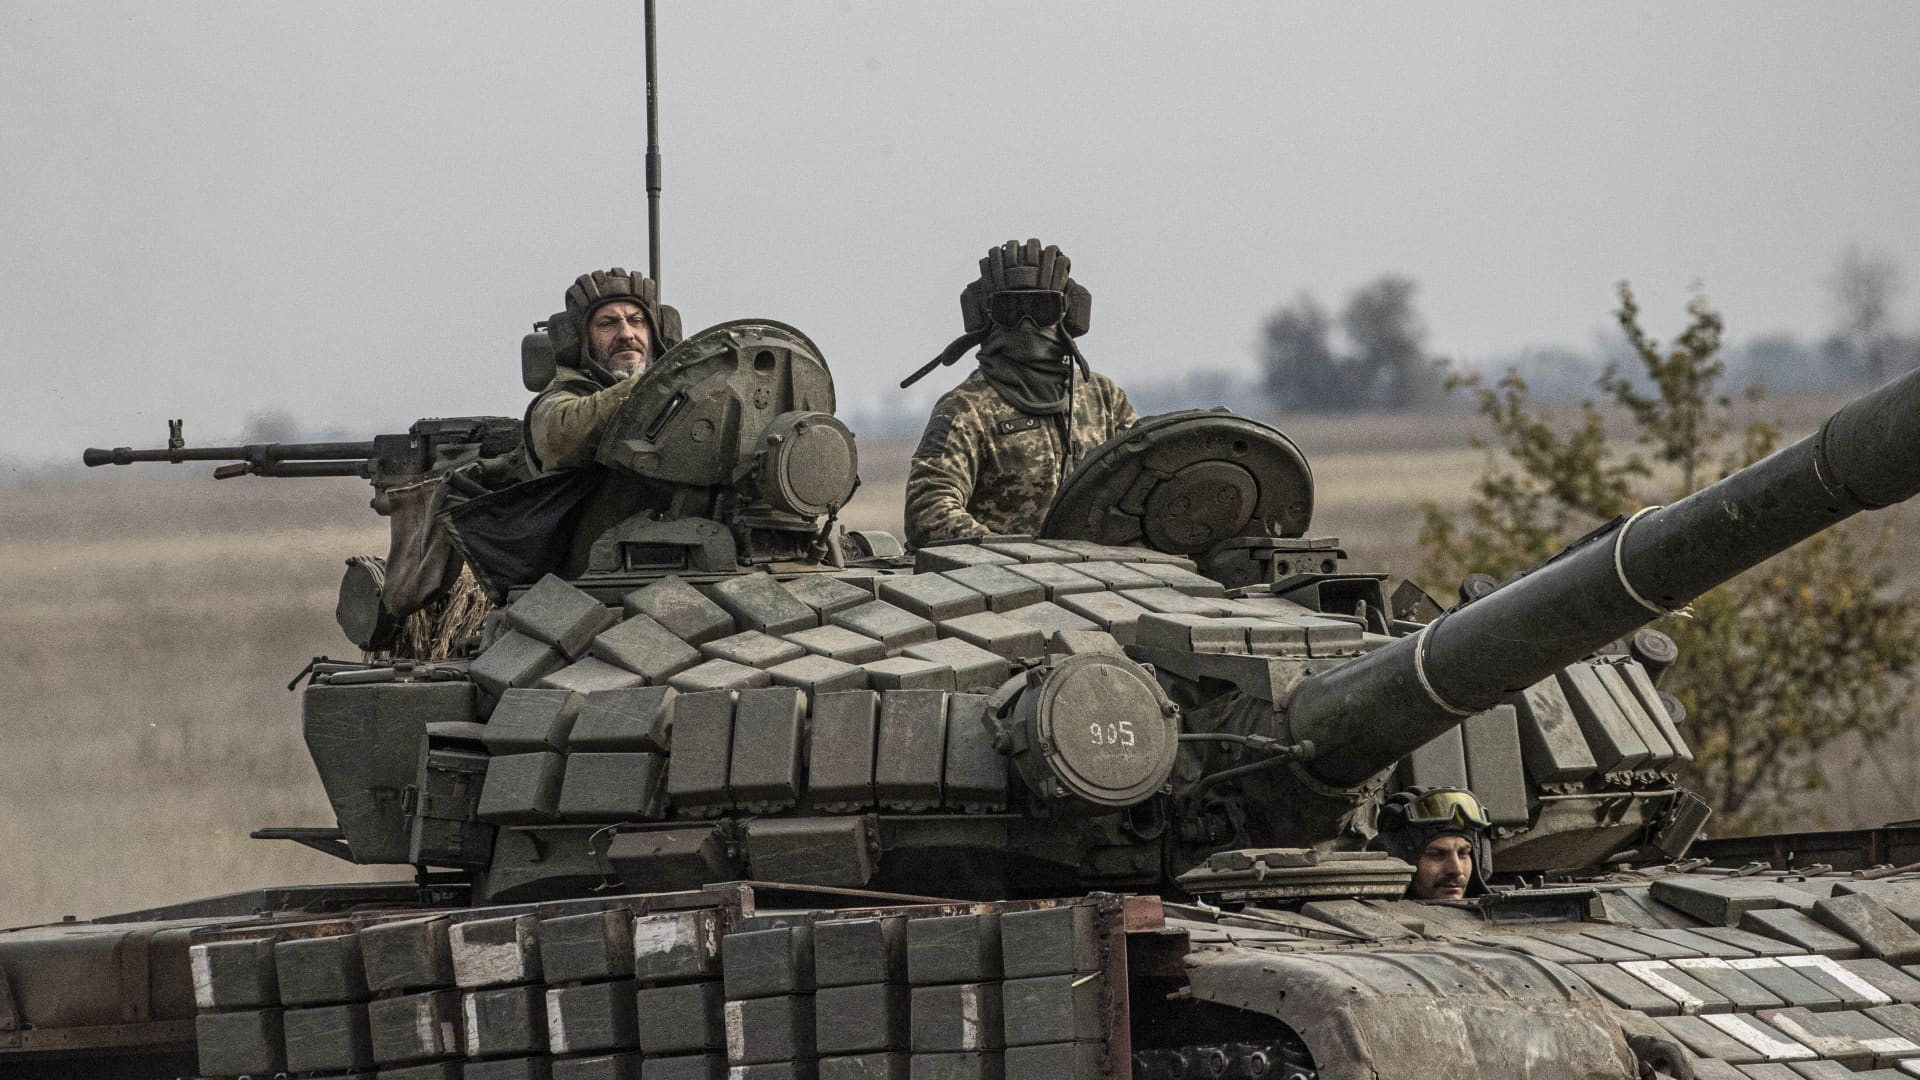 Ukrainian Armed Forces continuing their move toward the Kherson front in Ukraine on Nov. 9, 2022.